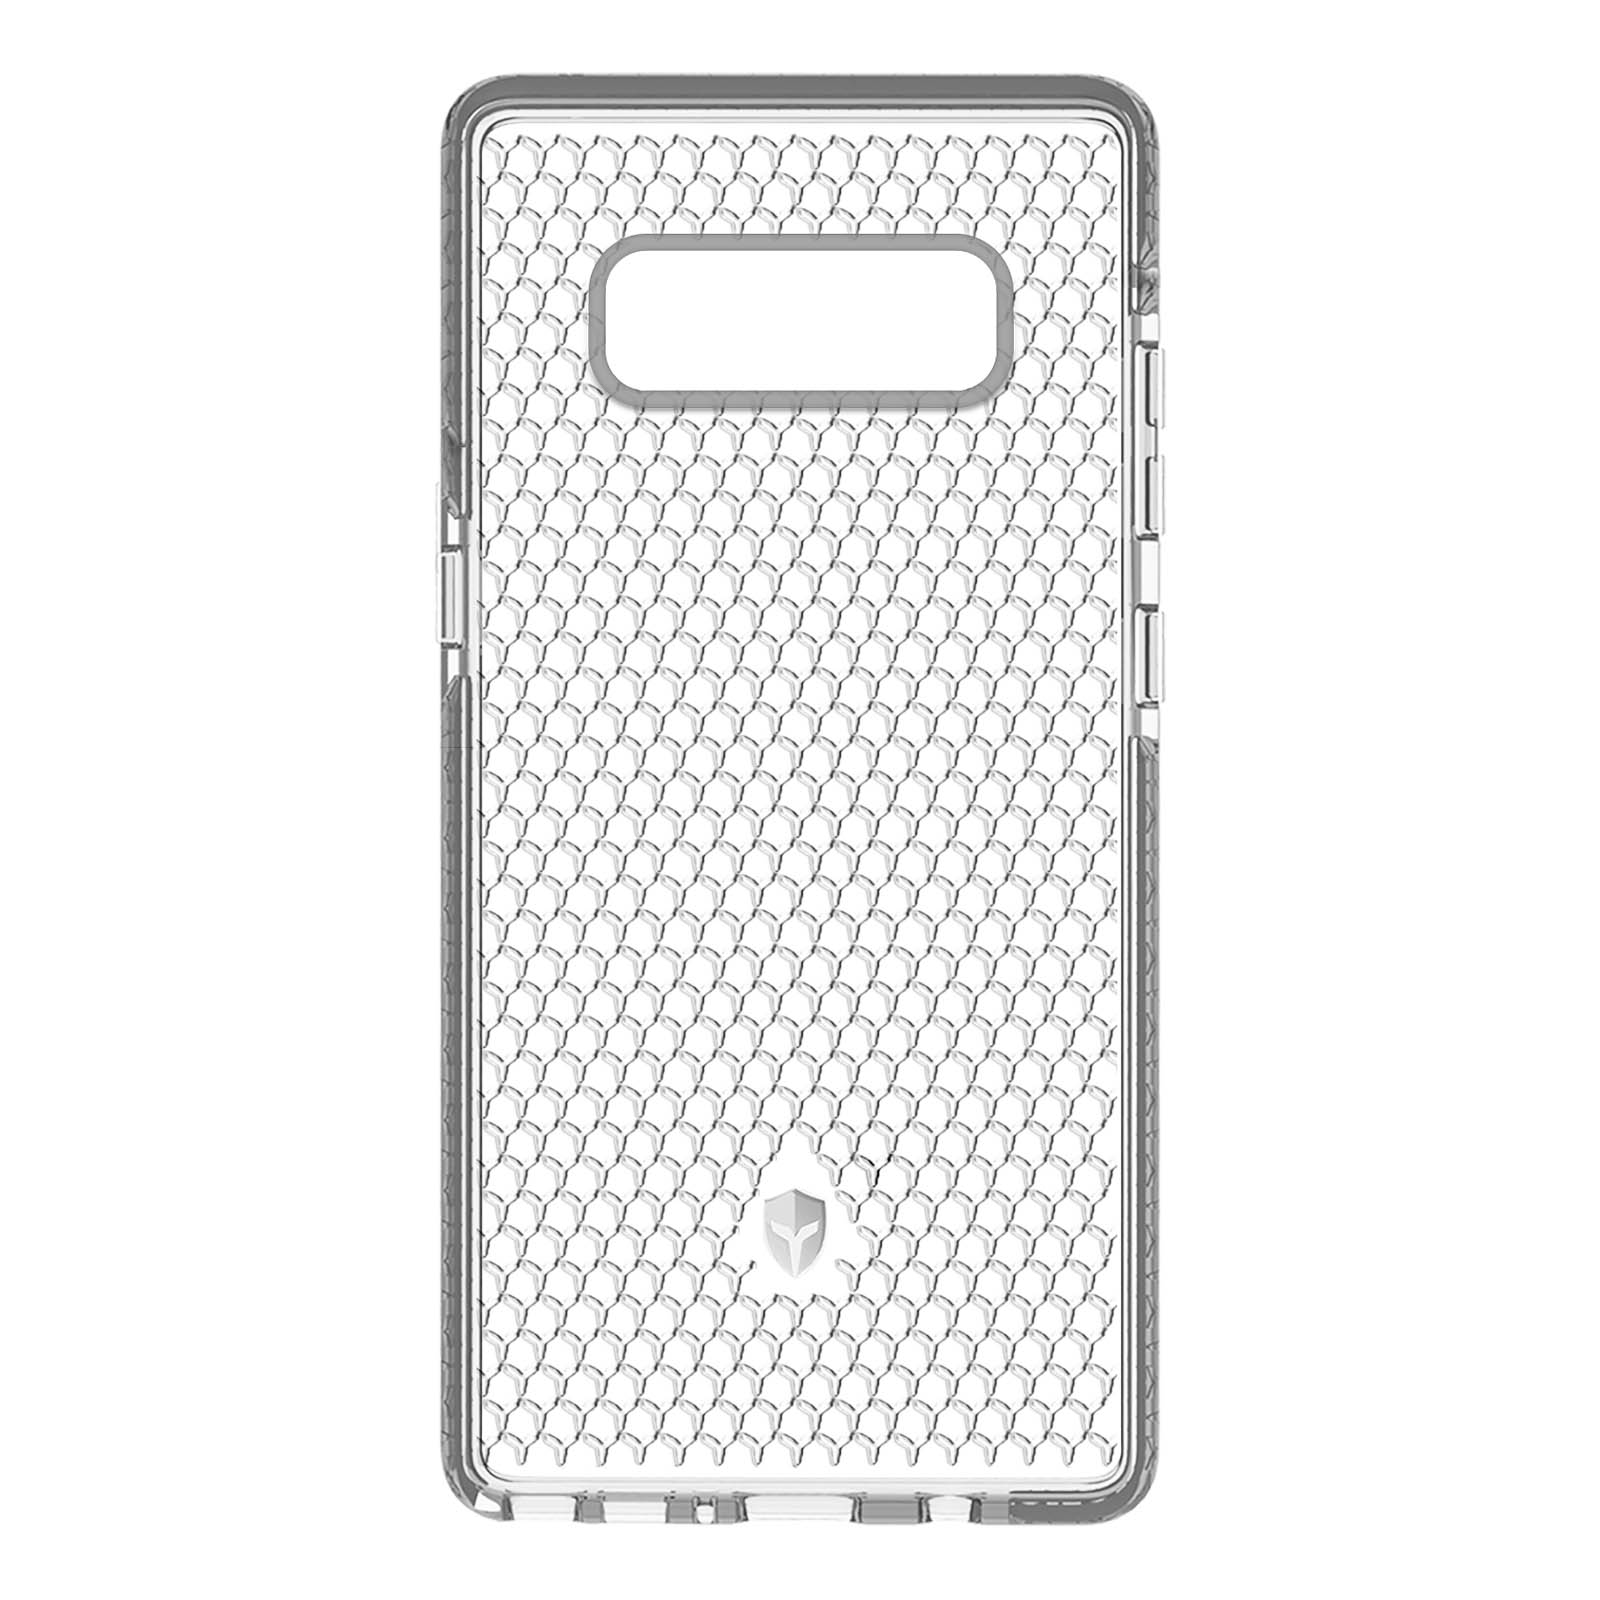 CASE Backcover, Note Galaxy mit Samsung, Life FORCE Tryax-System 8, Transparent Series,